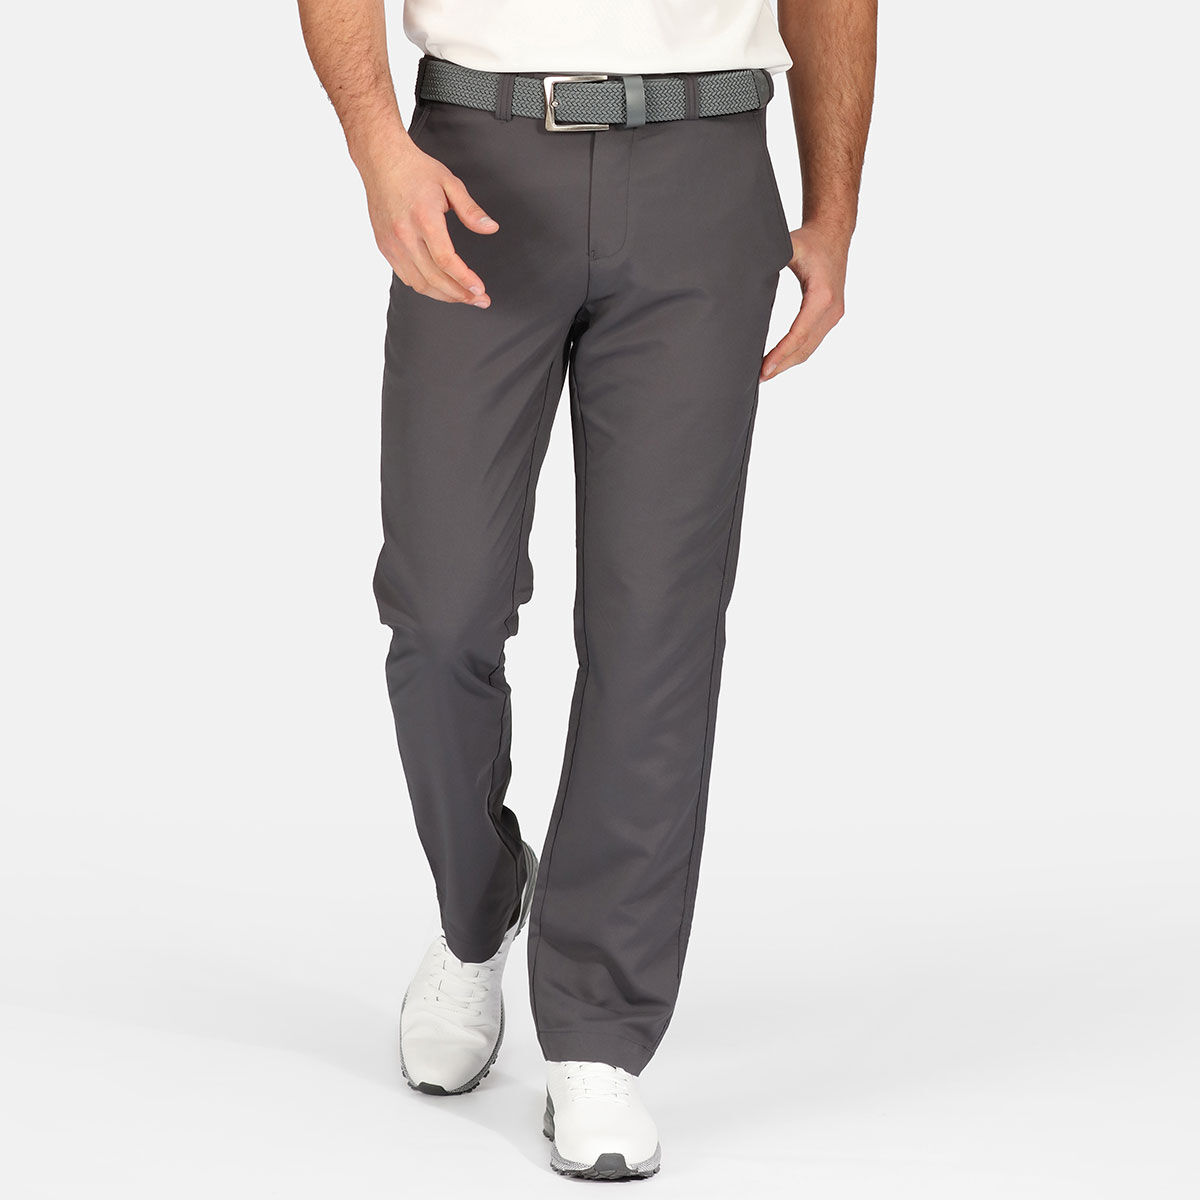 Stromberg Men's Weather Tech Stretch Golf Trousers, Mens, Grey, 36, Long | American Golf - Father's Day Gift von Stromberg